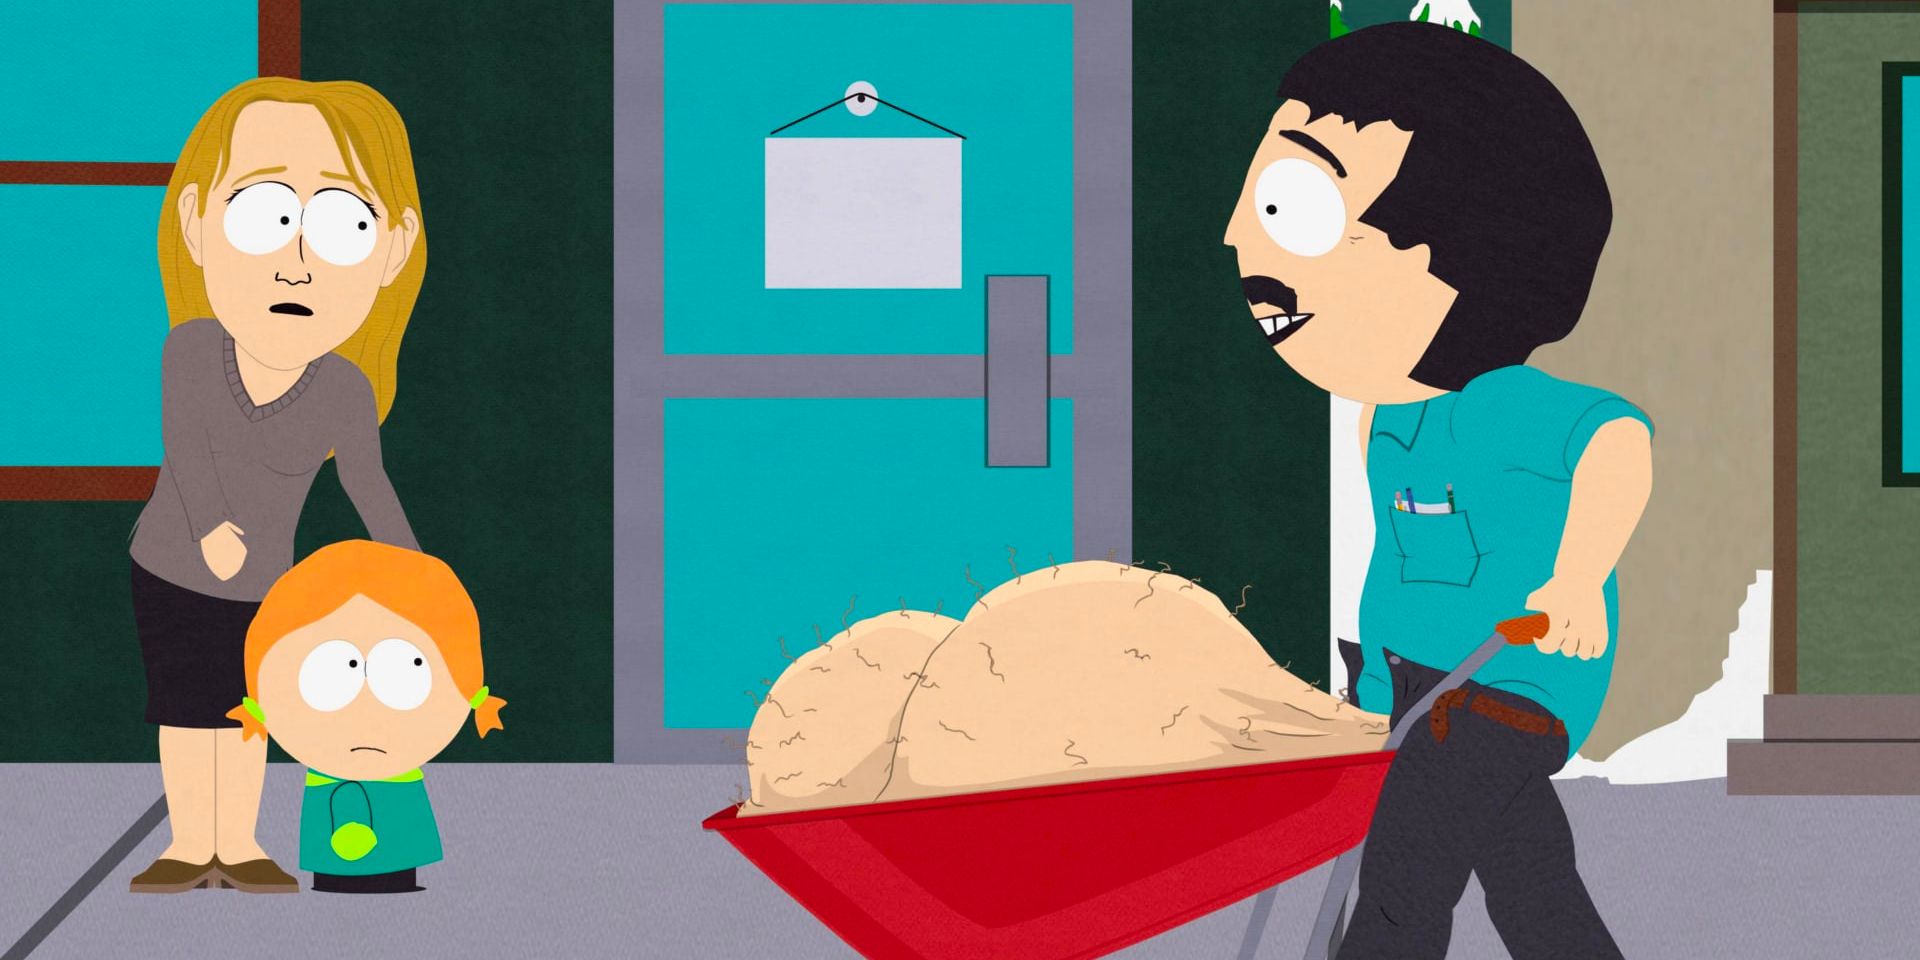 Randy Marsh hauls his testicles down the street in 'South Park' Season 14, Episode 3 "Medicinal Fried Chicken" (2010)